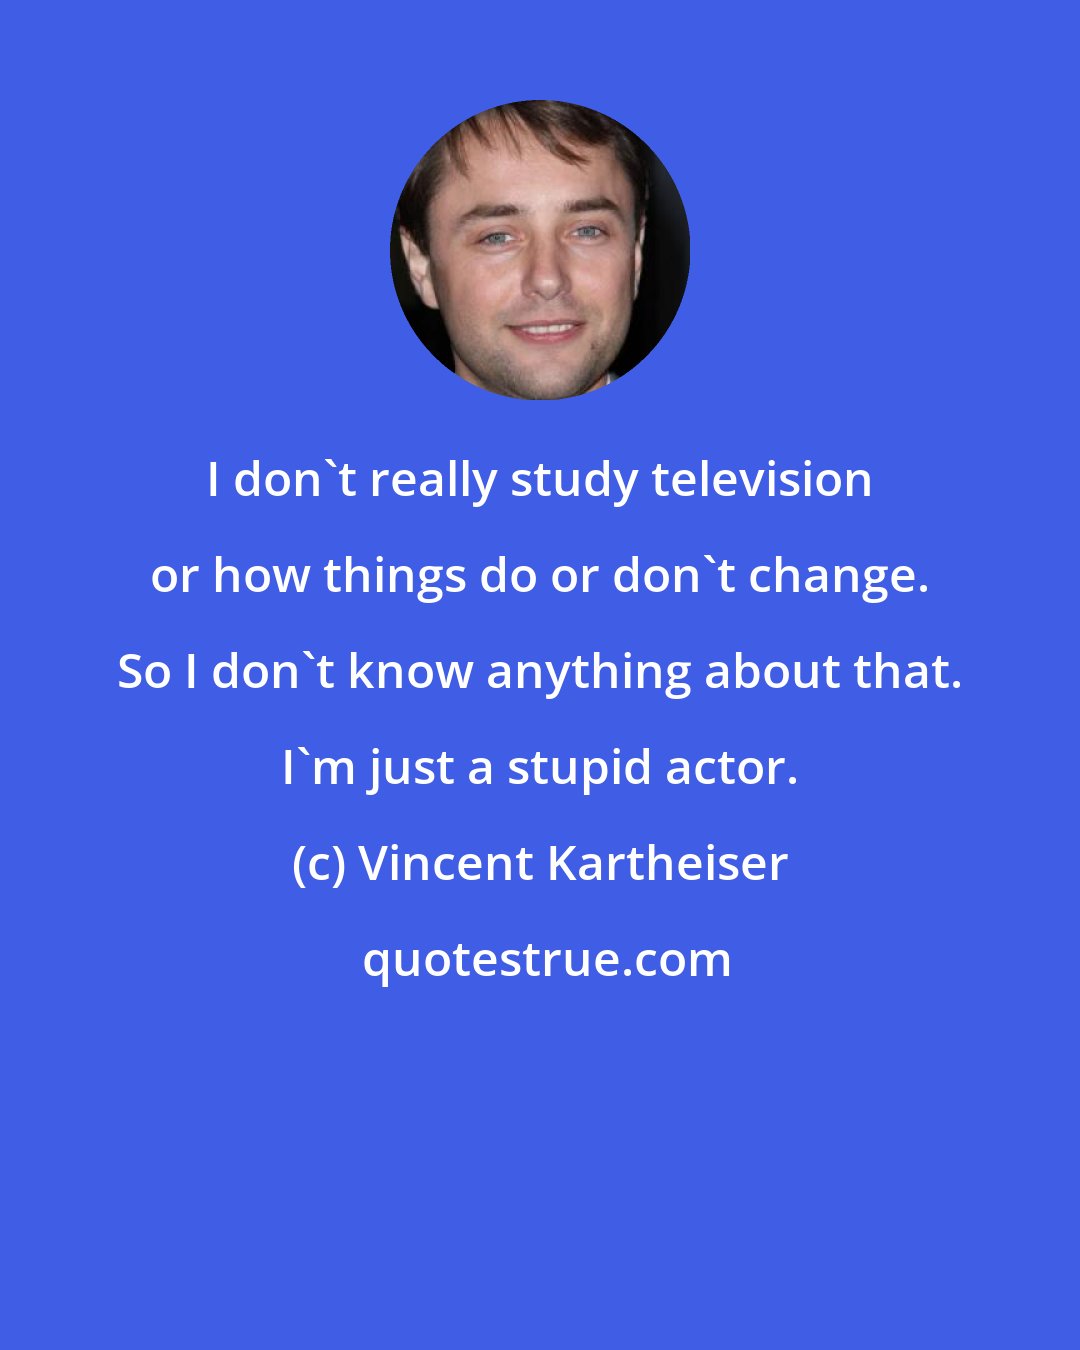 Vincent Kartheiser: I don't really study television or how things do or don't change. So I don't know anything about that. I'm just a stupid actor.